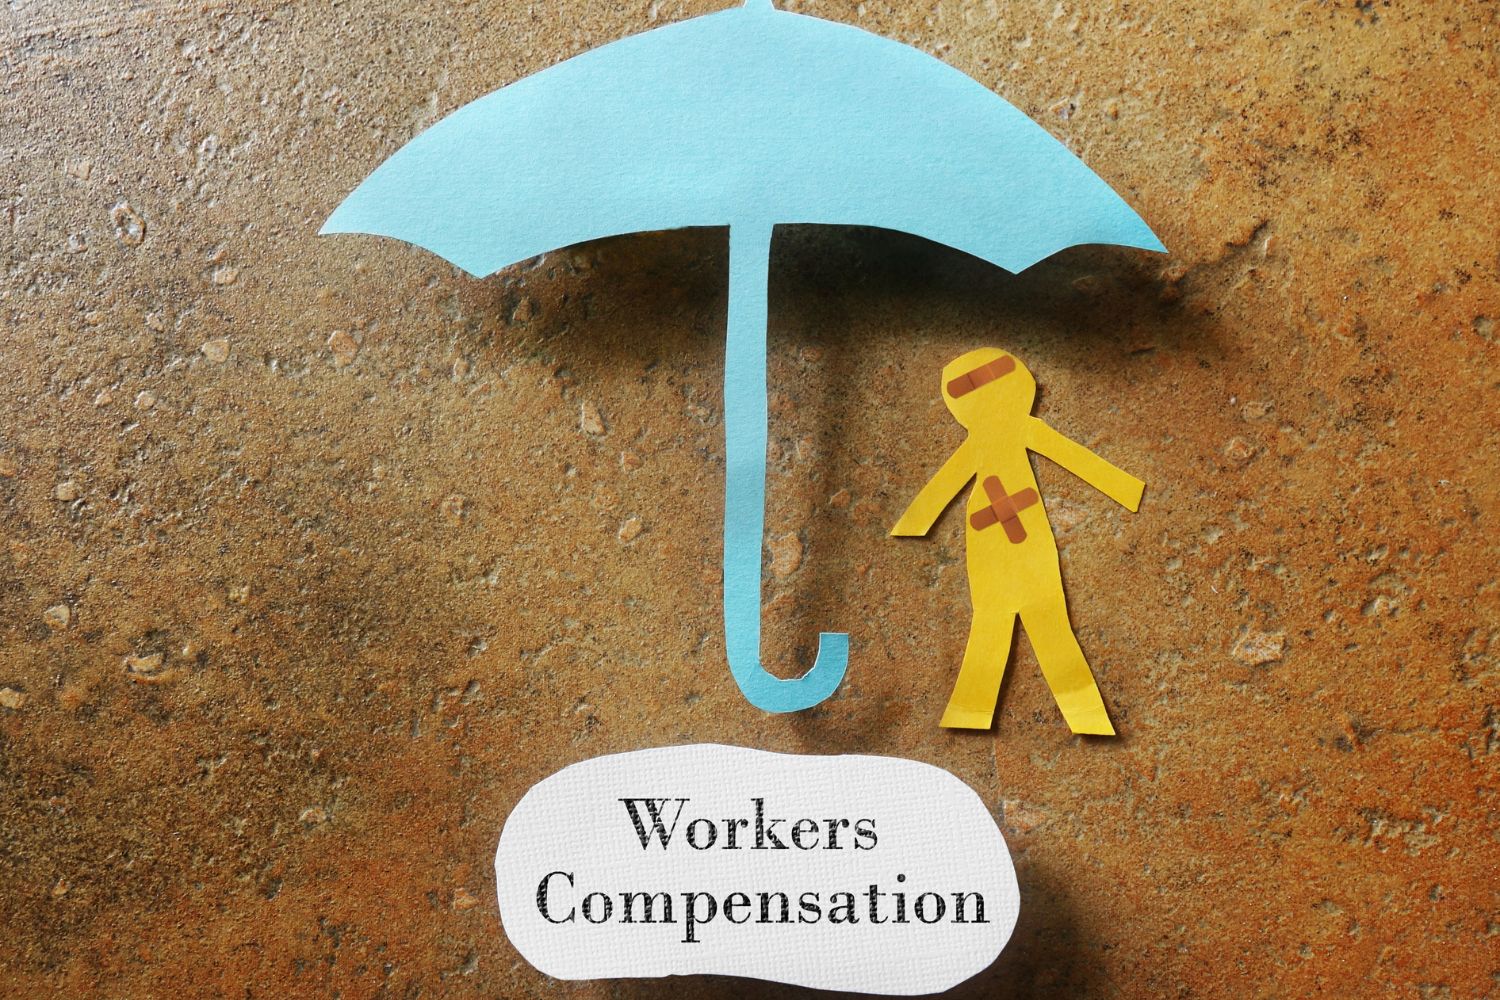 Workers’ compensation a big win for gig economy workers